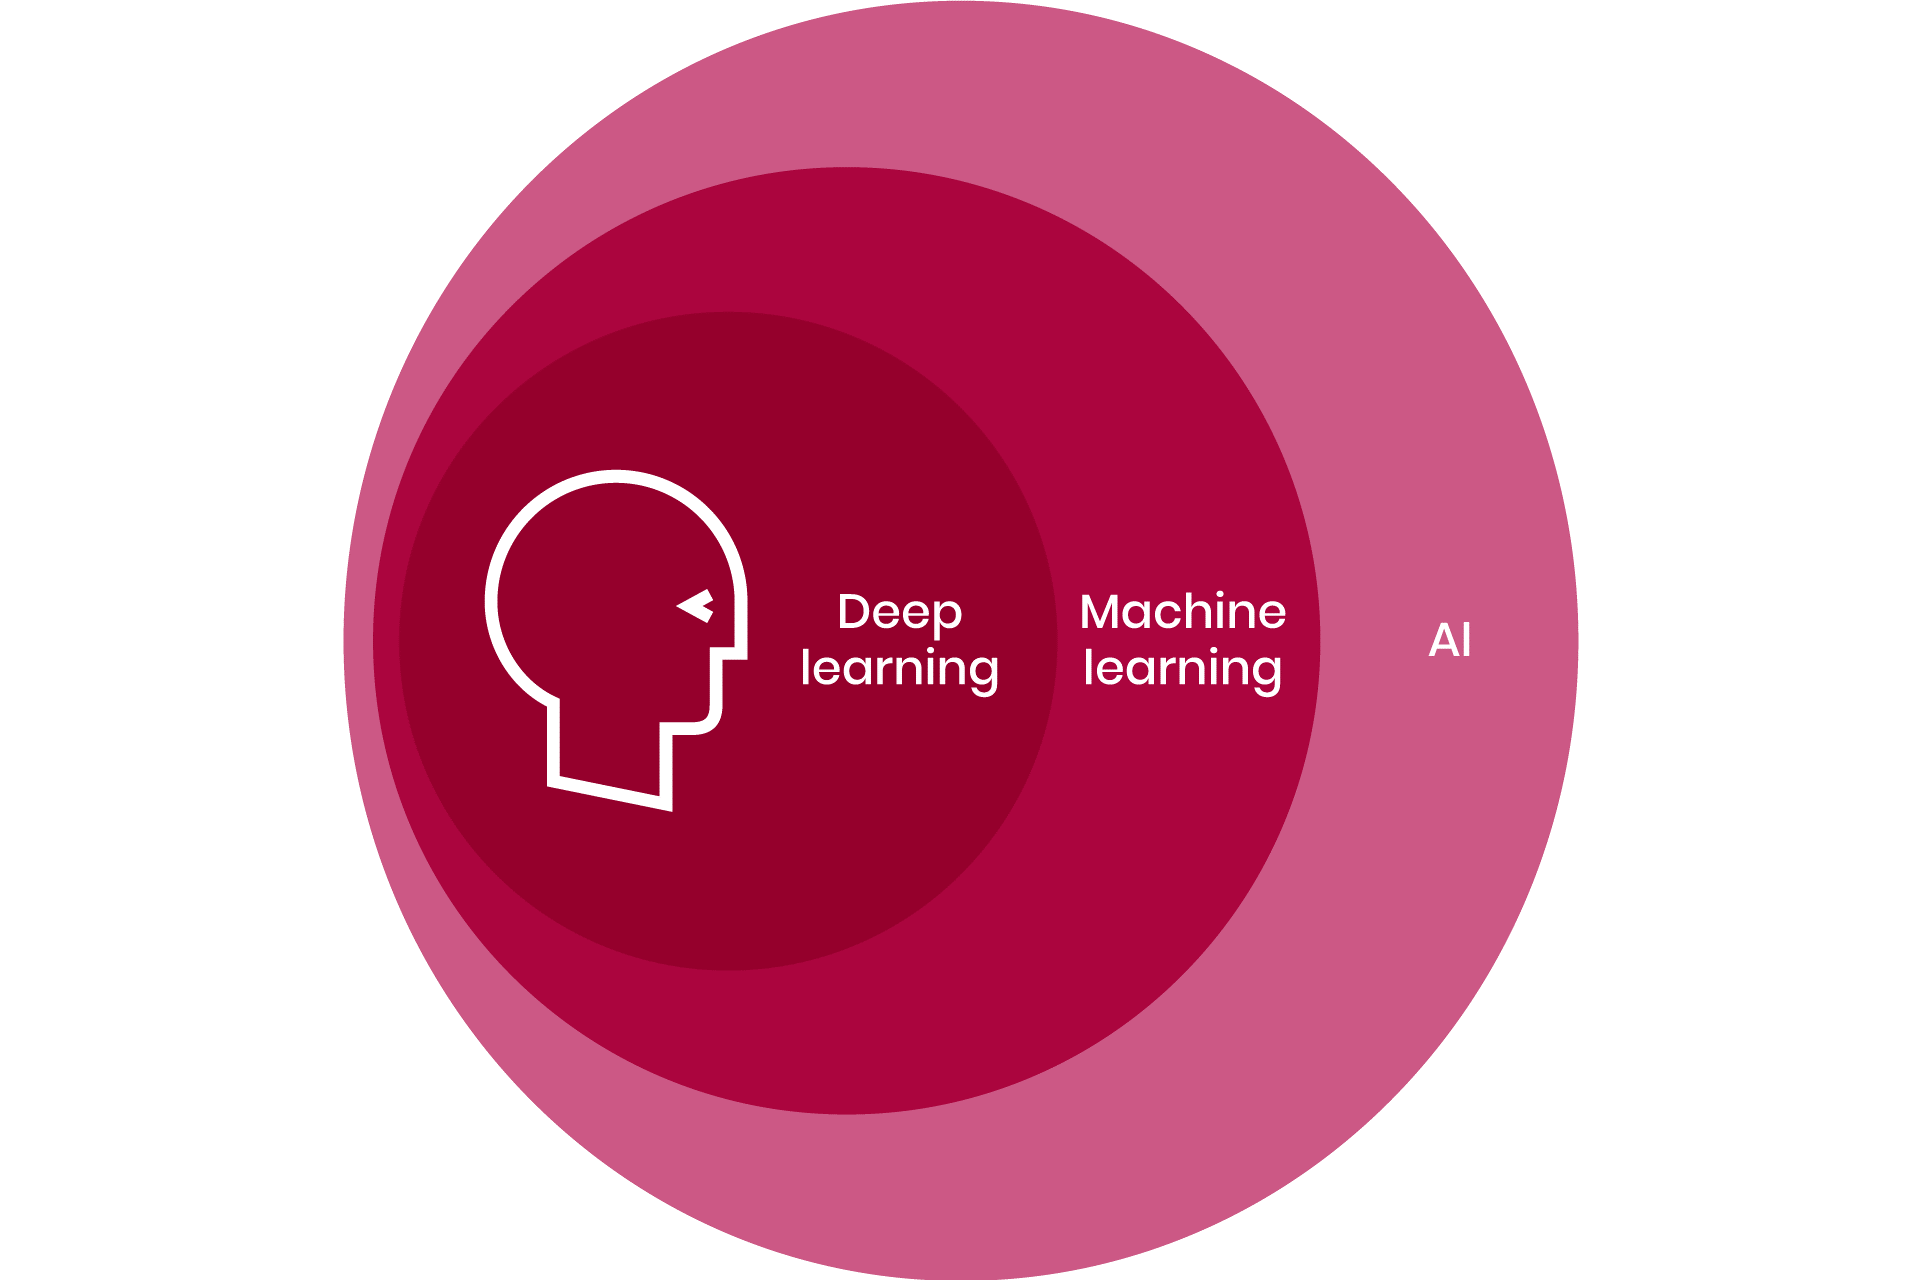 Differenza tra deep learning, machine learning e AI